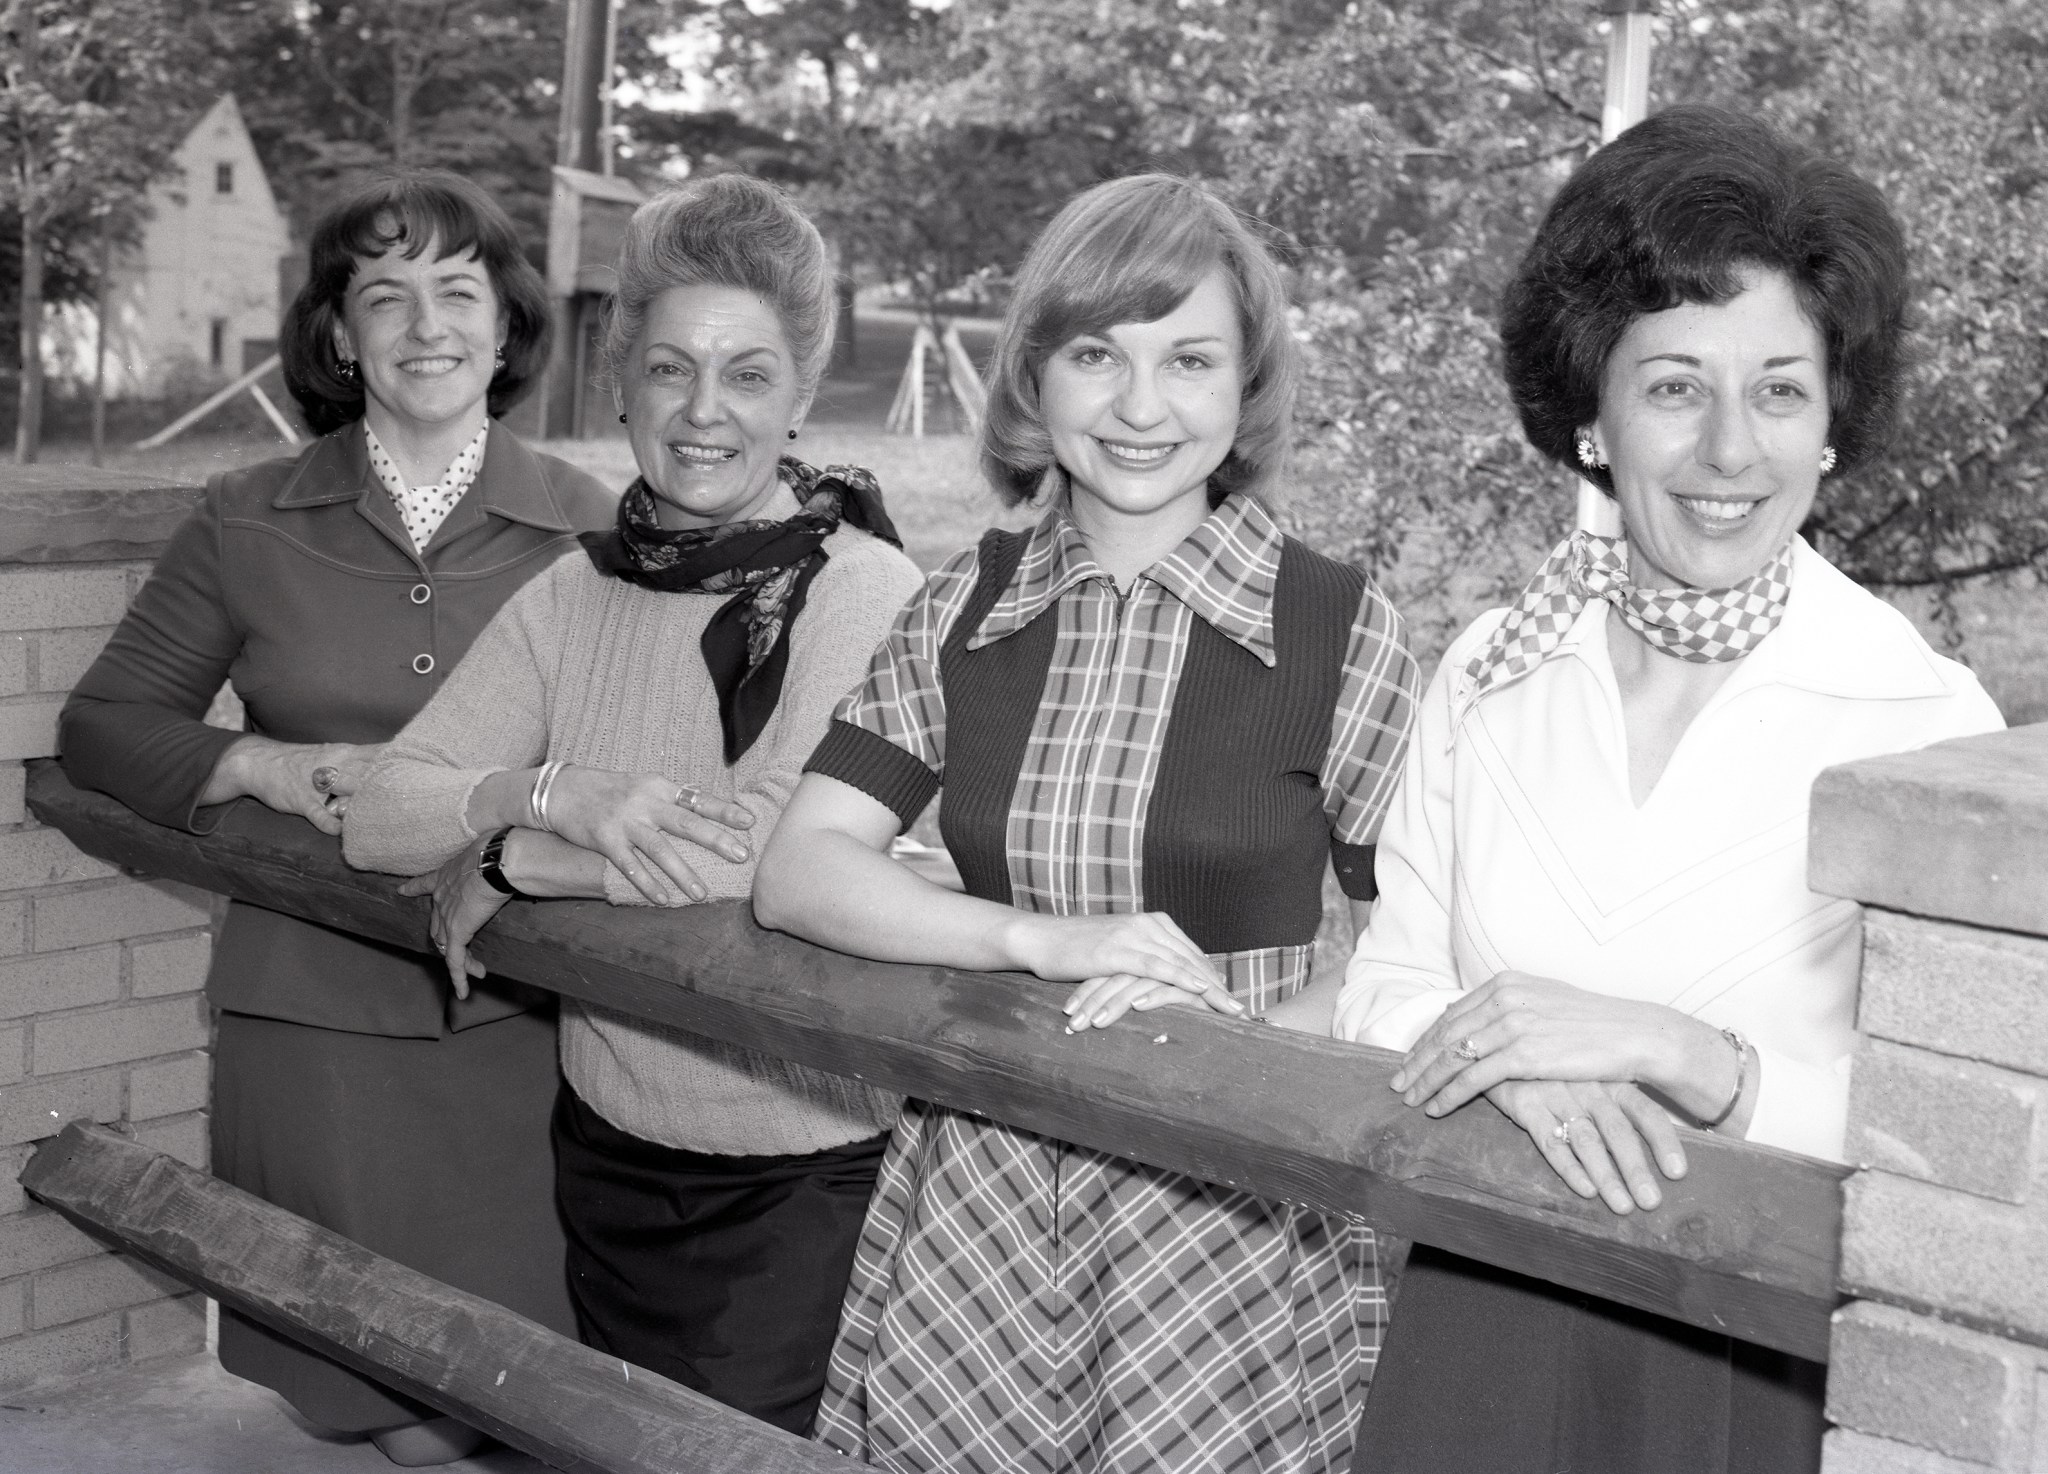 Four women smile while standing at a railing.